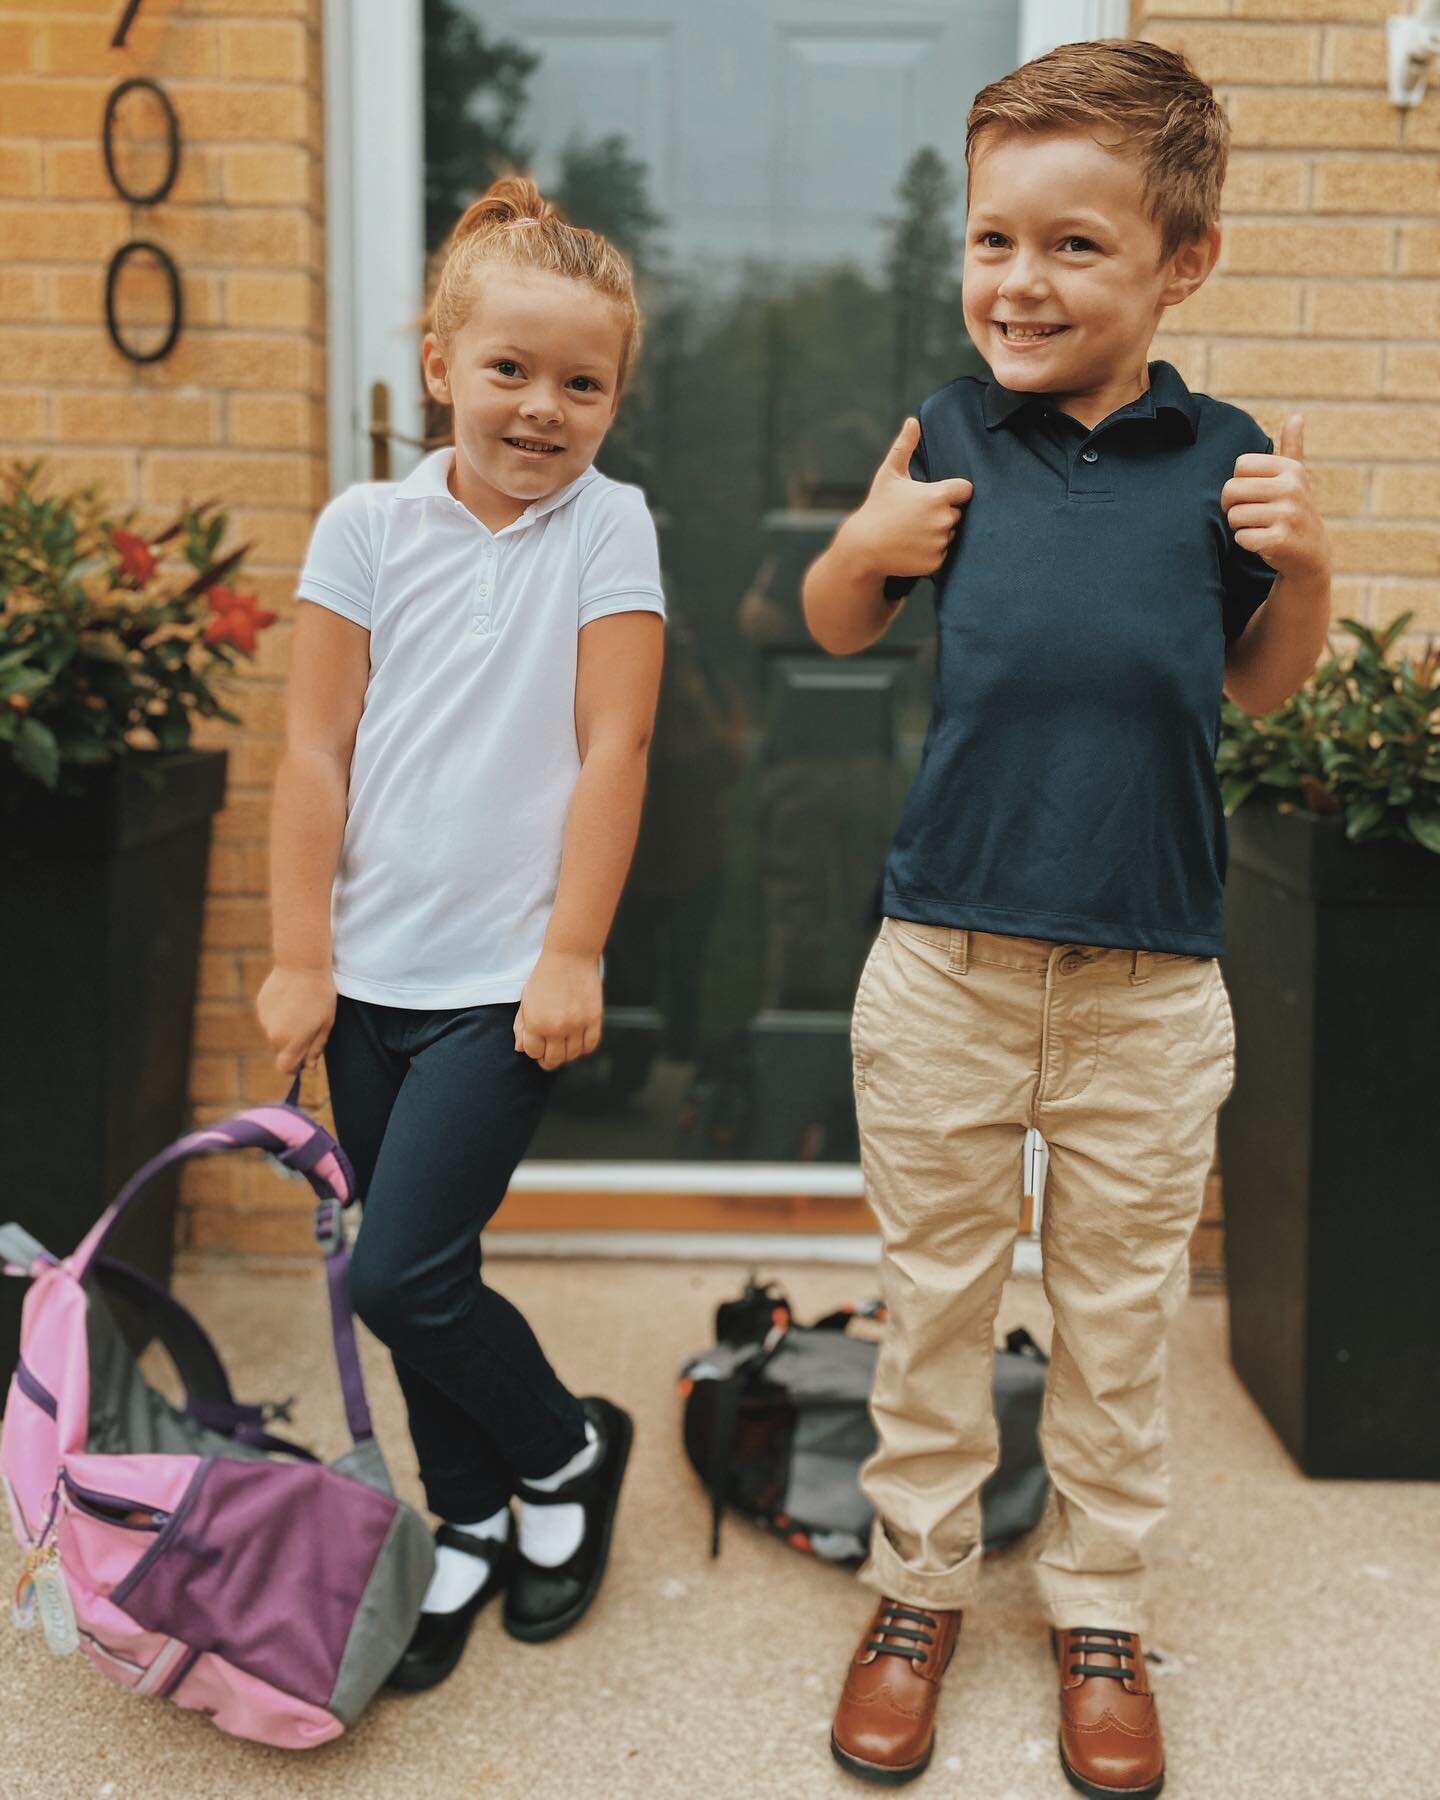 First day of being IN SCHOOL! We are all so excited. Like SO excited.